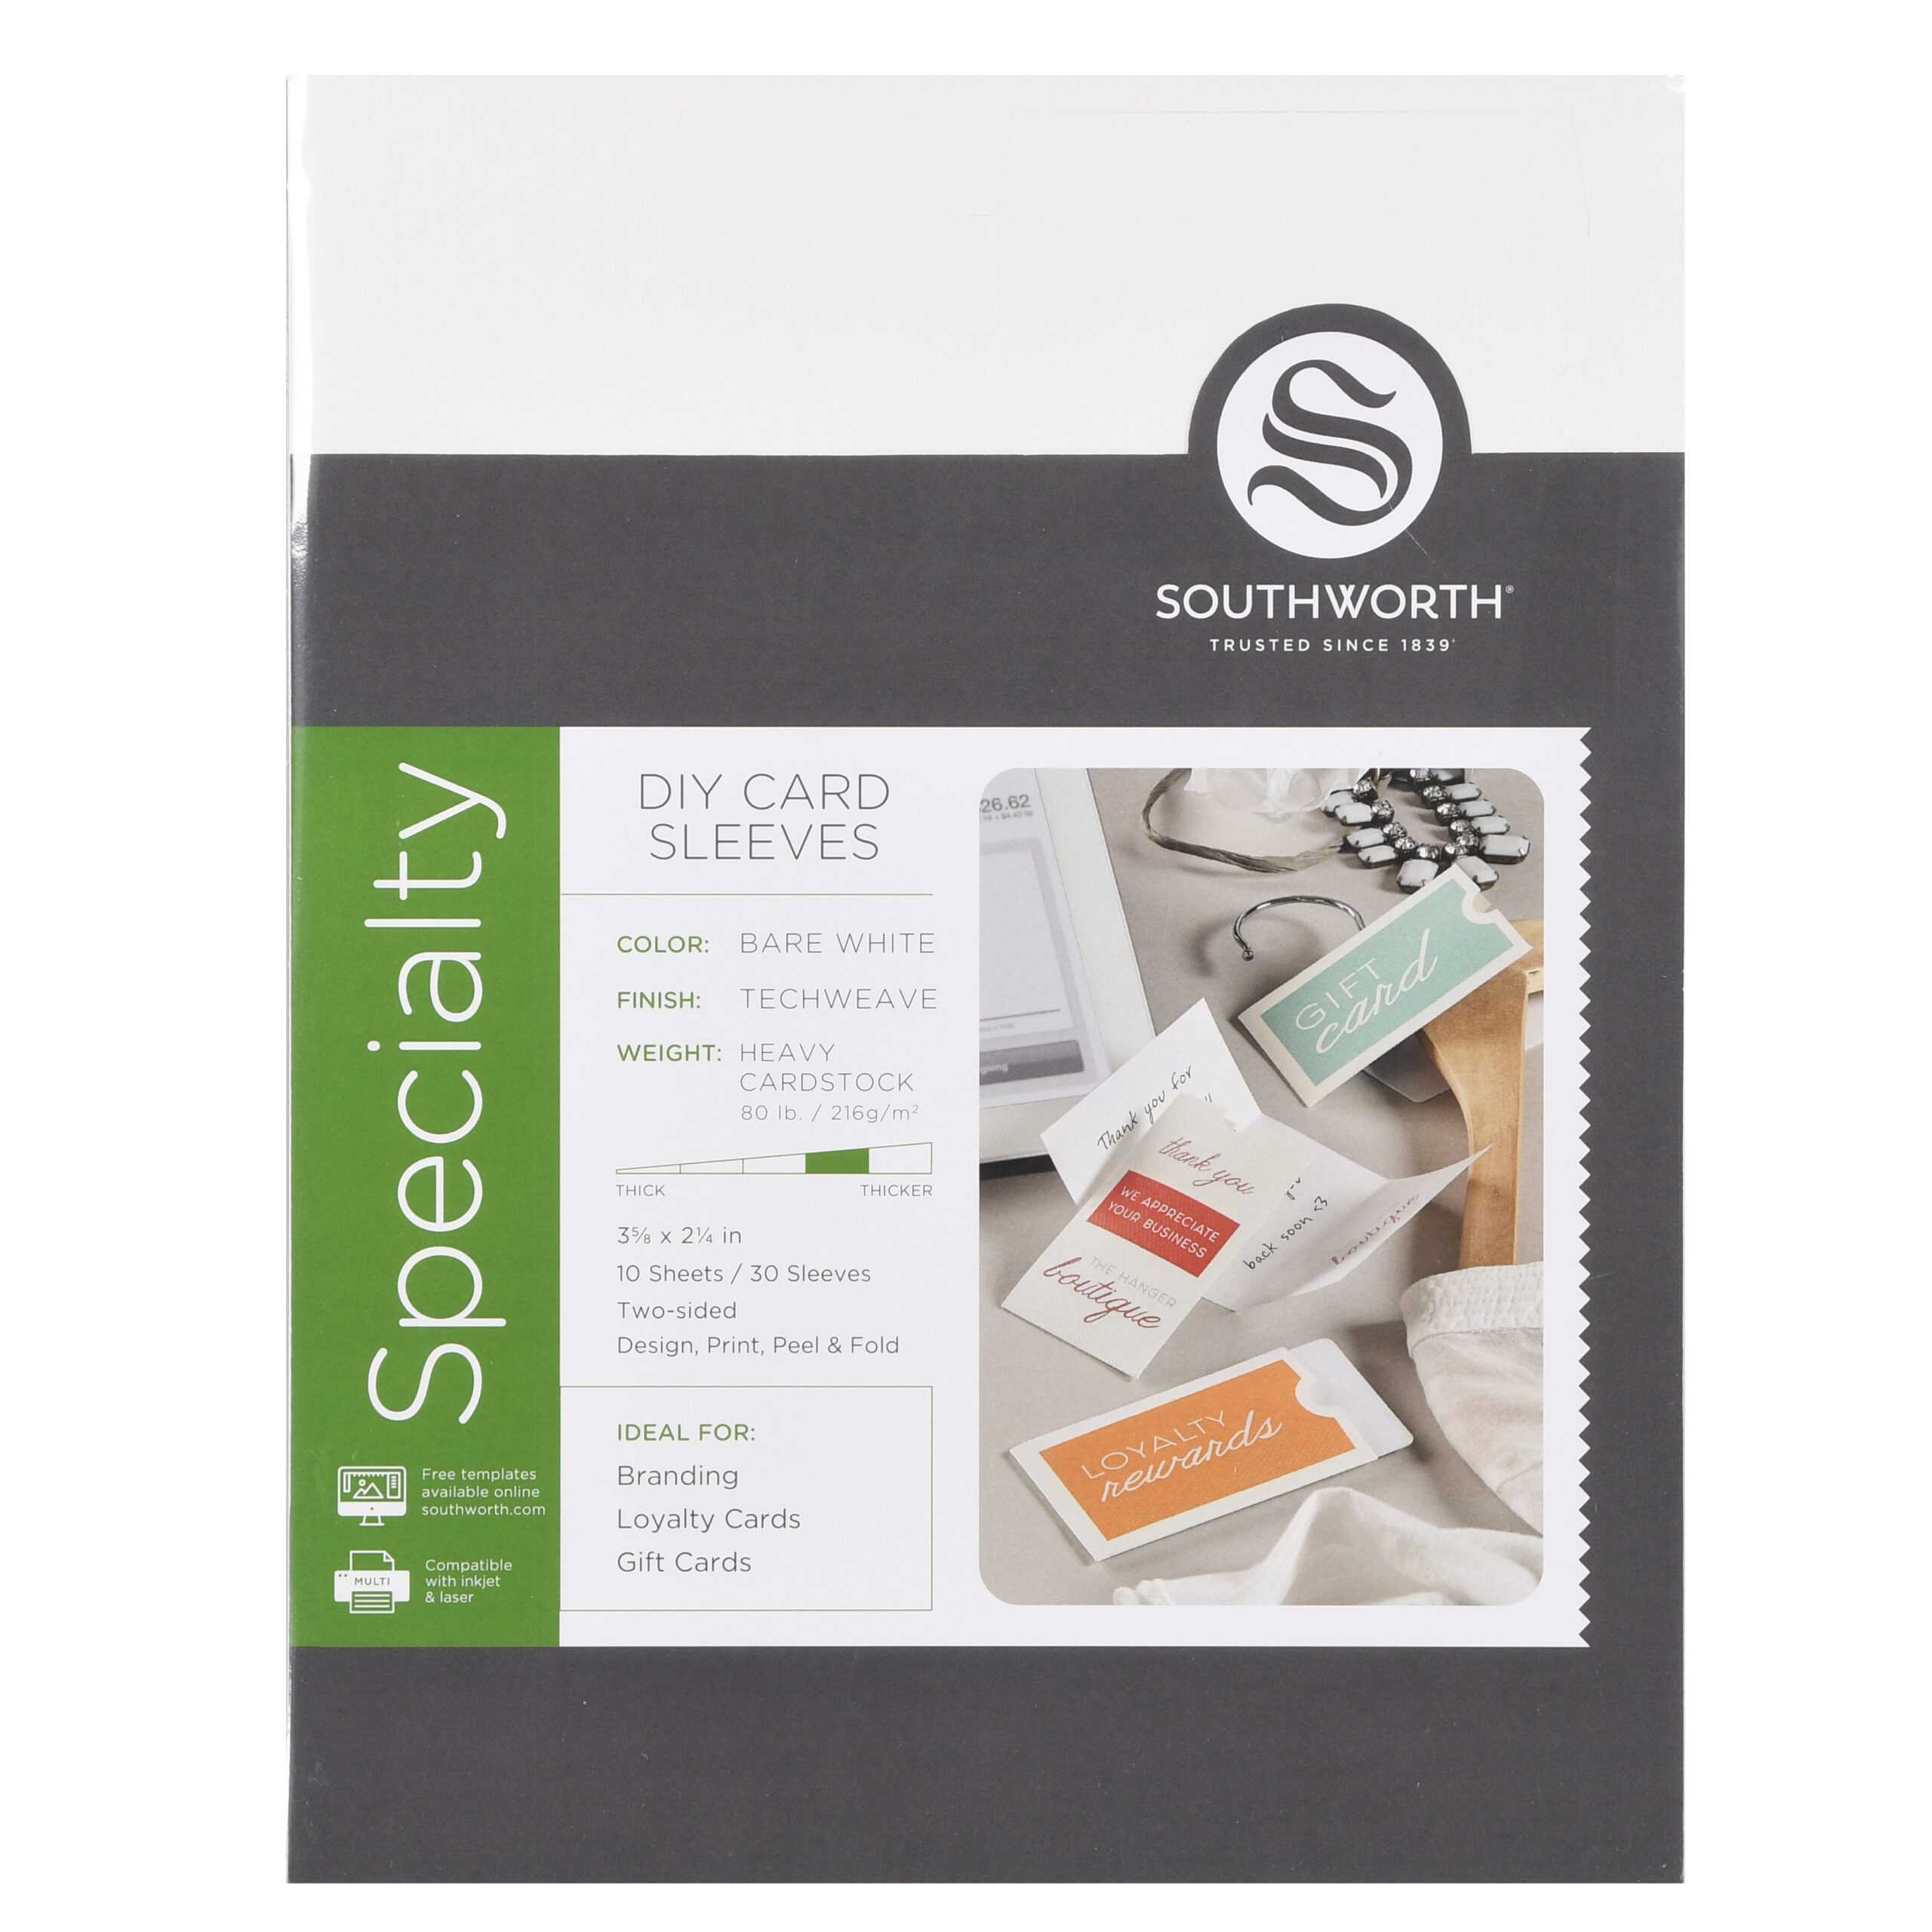 Southworth Diy Card Sleeves, 3.6" X 2.25", 80 Lb., Techweave Finish, Bare  White, 30 Ct. – Walmart Pertaining To Southworth Business Card Template